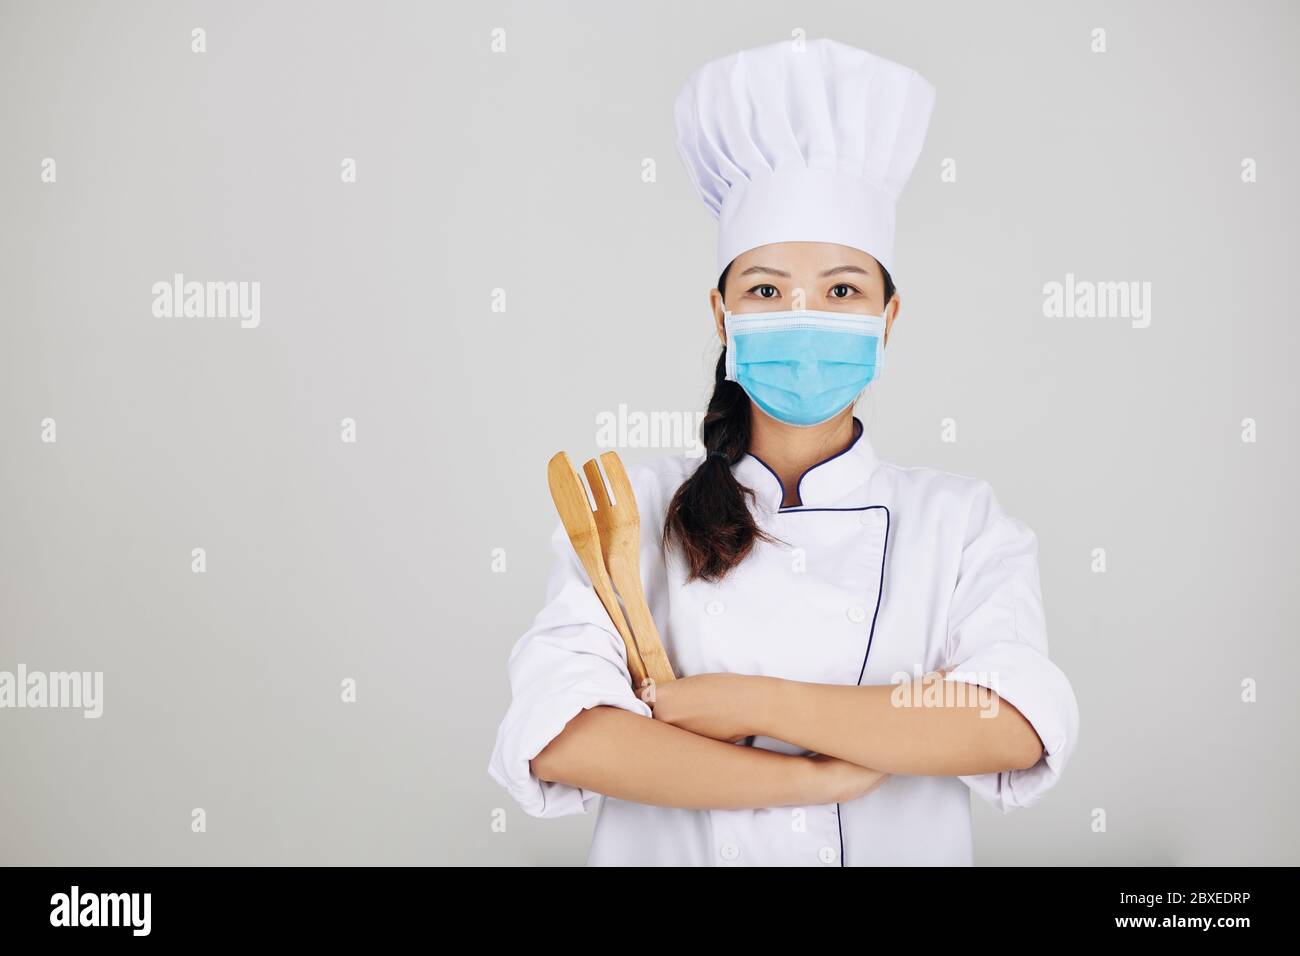 Confident young restaurant chef in medical mask posing with wooden utensils Stock Photo